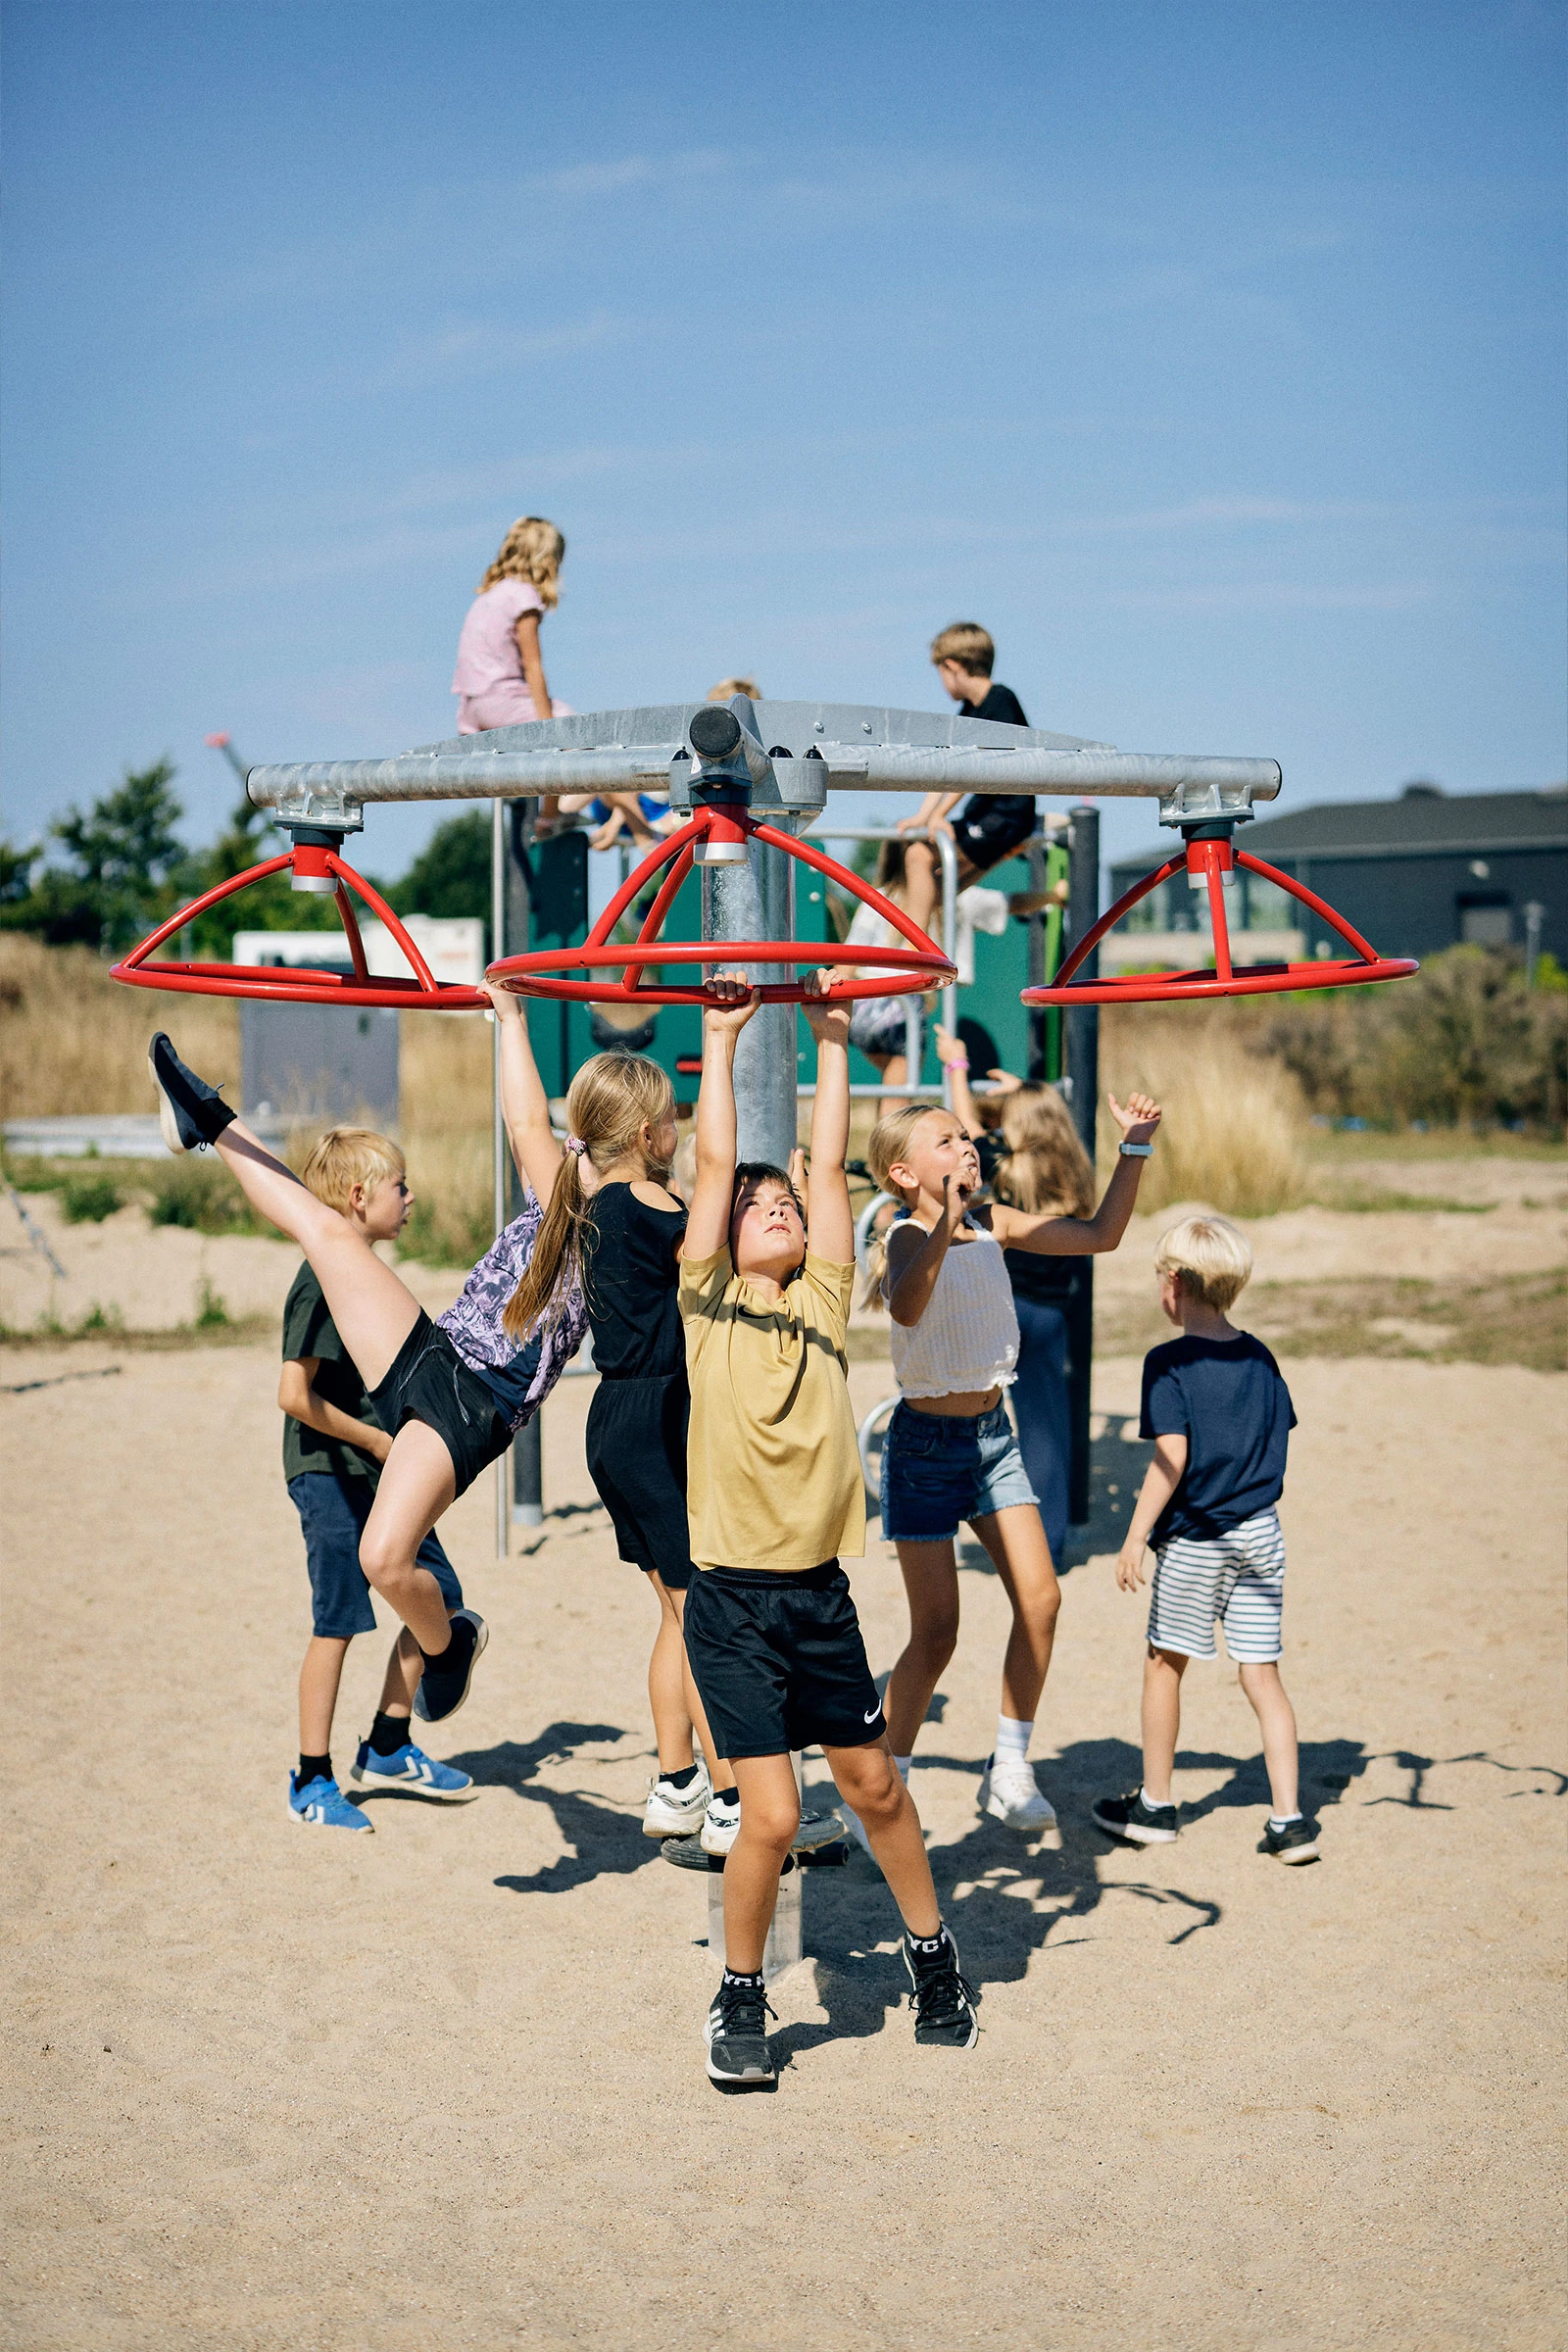 Children playing and working together to spin on playground equipment